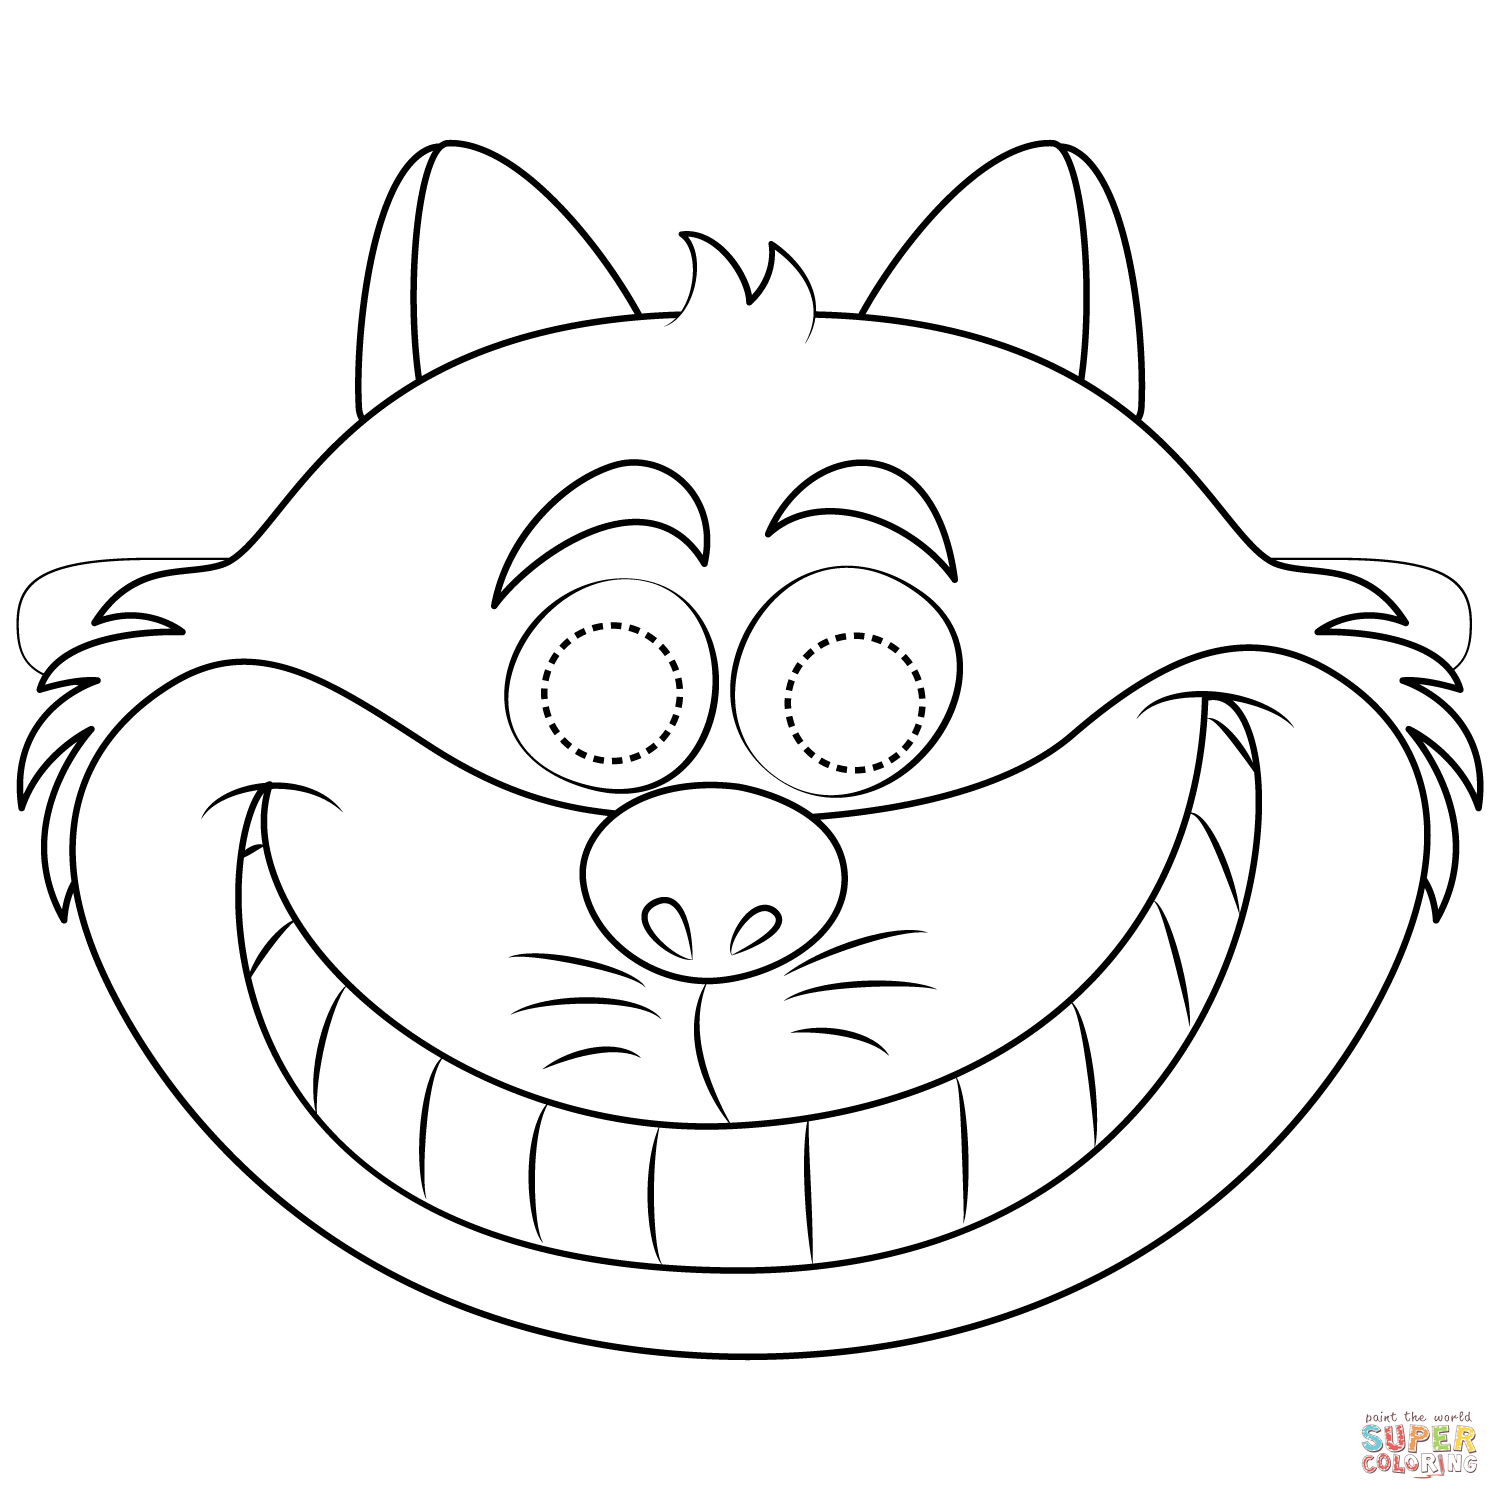 Cheshire Cat Mask coloring page | Free Printable Coloring Pages